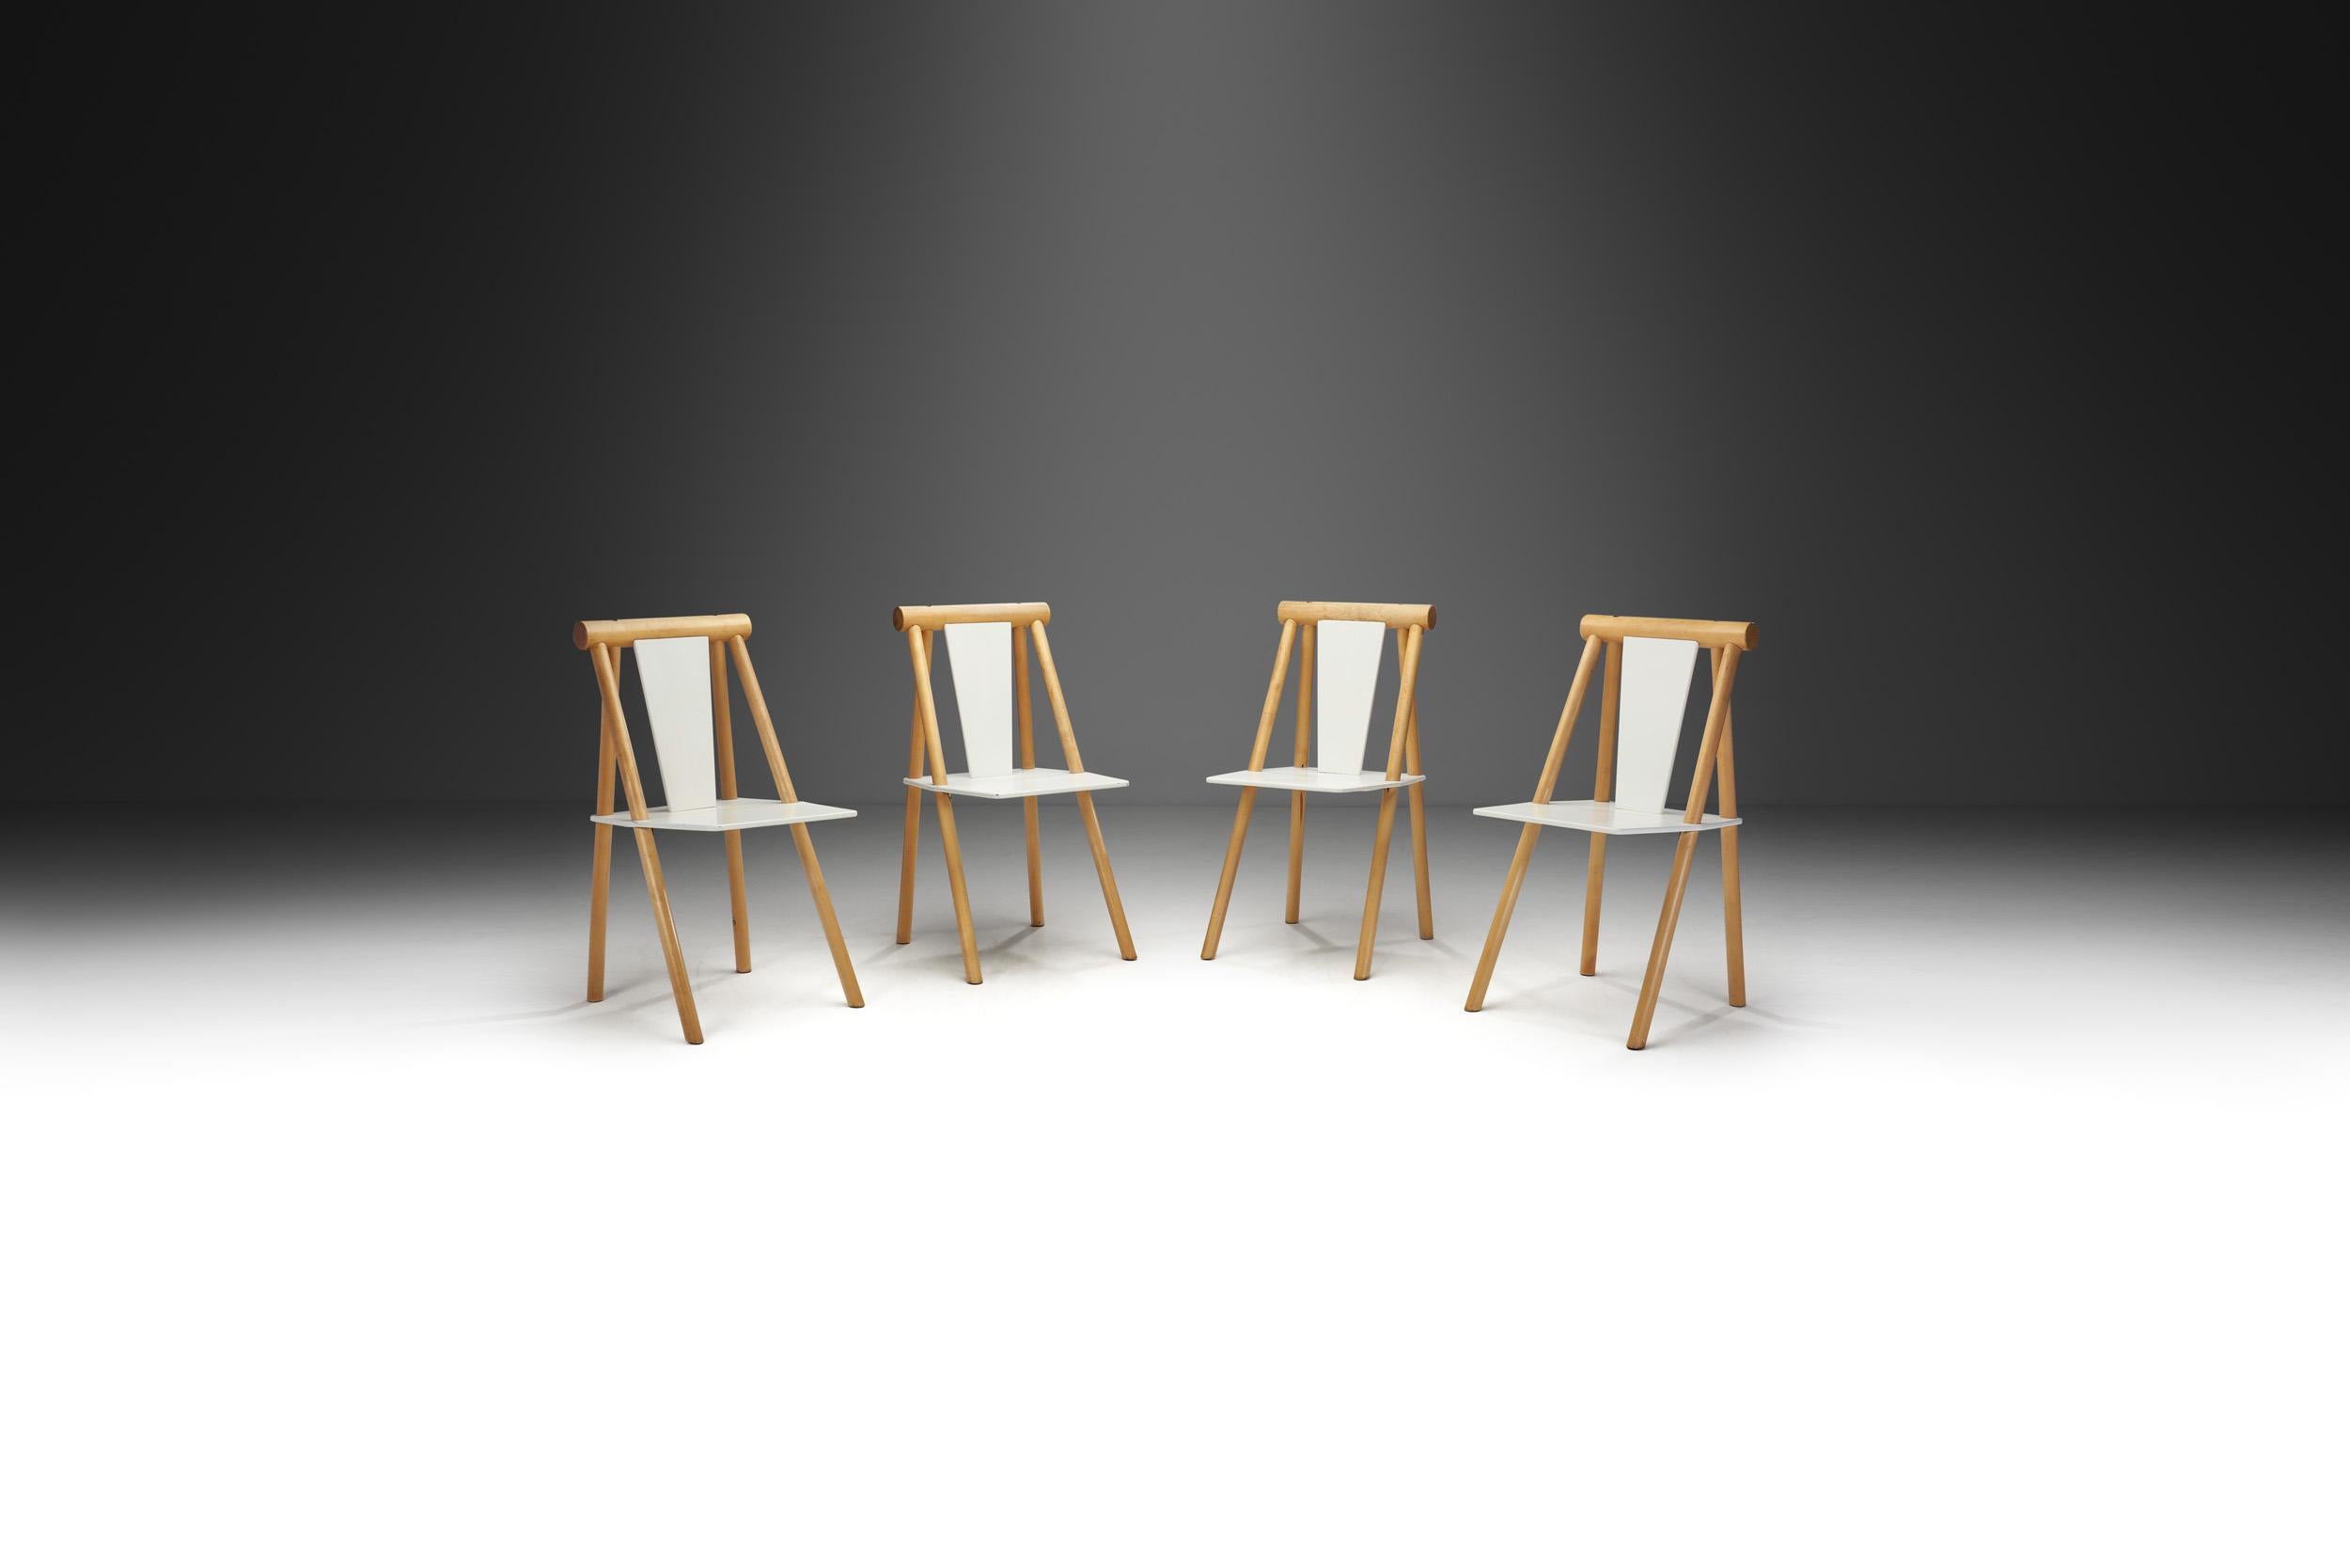 The artistic flair is apparent with this set of four dining chairs. The design uses elements of geometry to create a unique look based on the natural qualities of wood.

These chairs have an interesting look as a result of the structure that